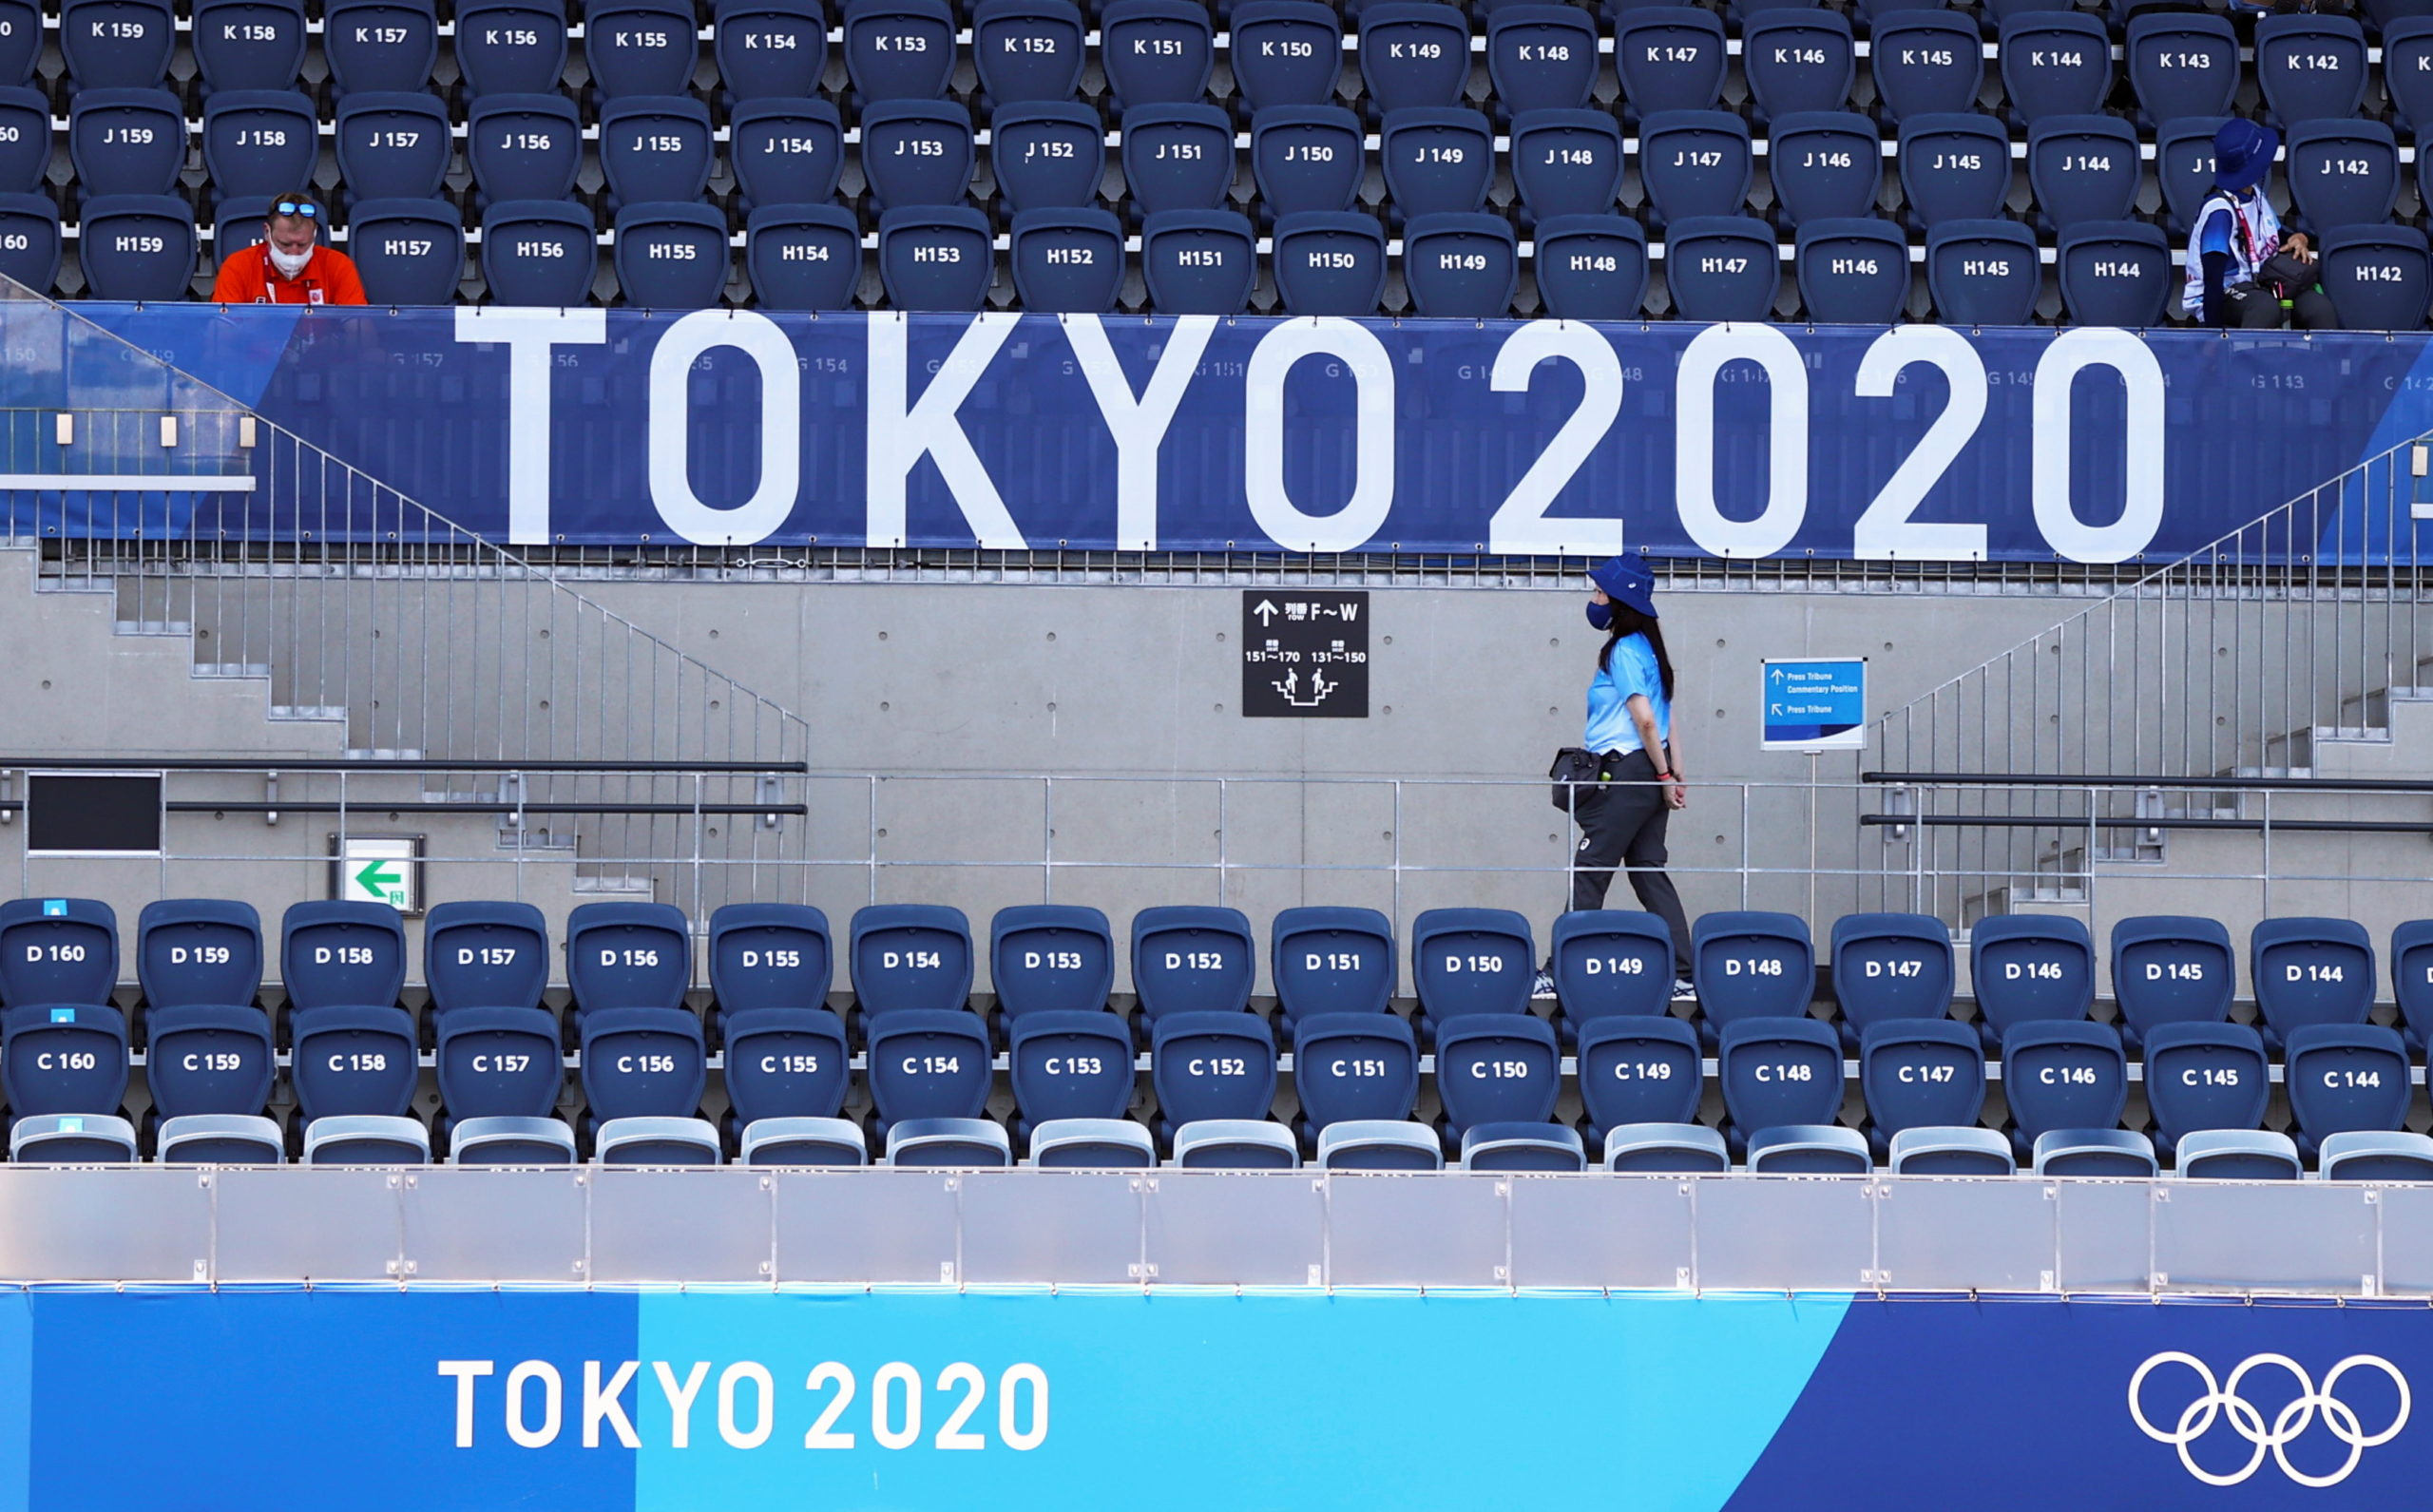 FILE PHOTO: A spectator sits as volunteers walk beneath the logo during the Tokyo 2020 Olympic Games at Oi Hockey Stadium in Tokyo, Japan, July 24, 2021.